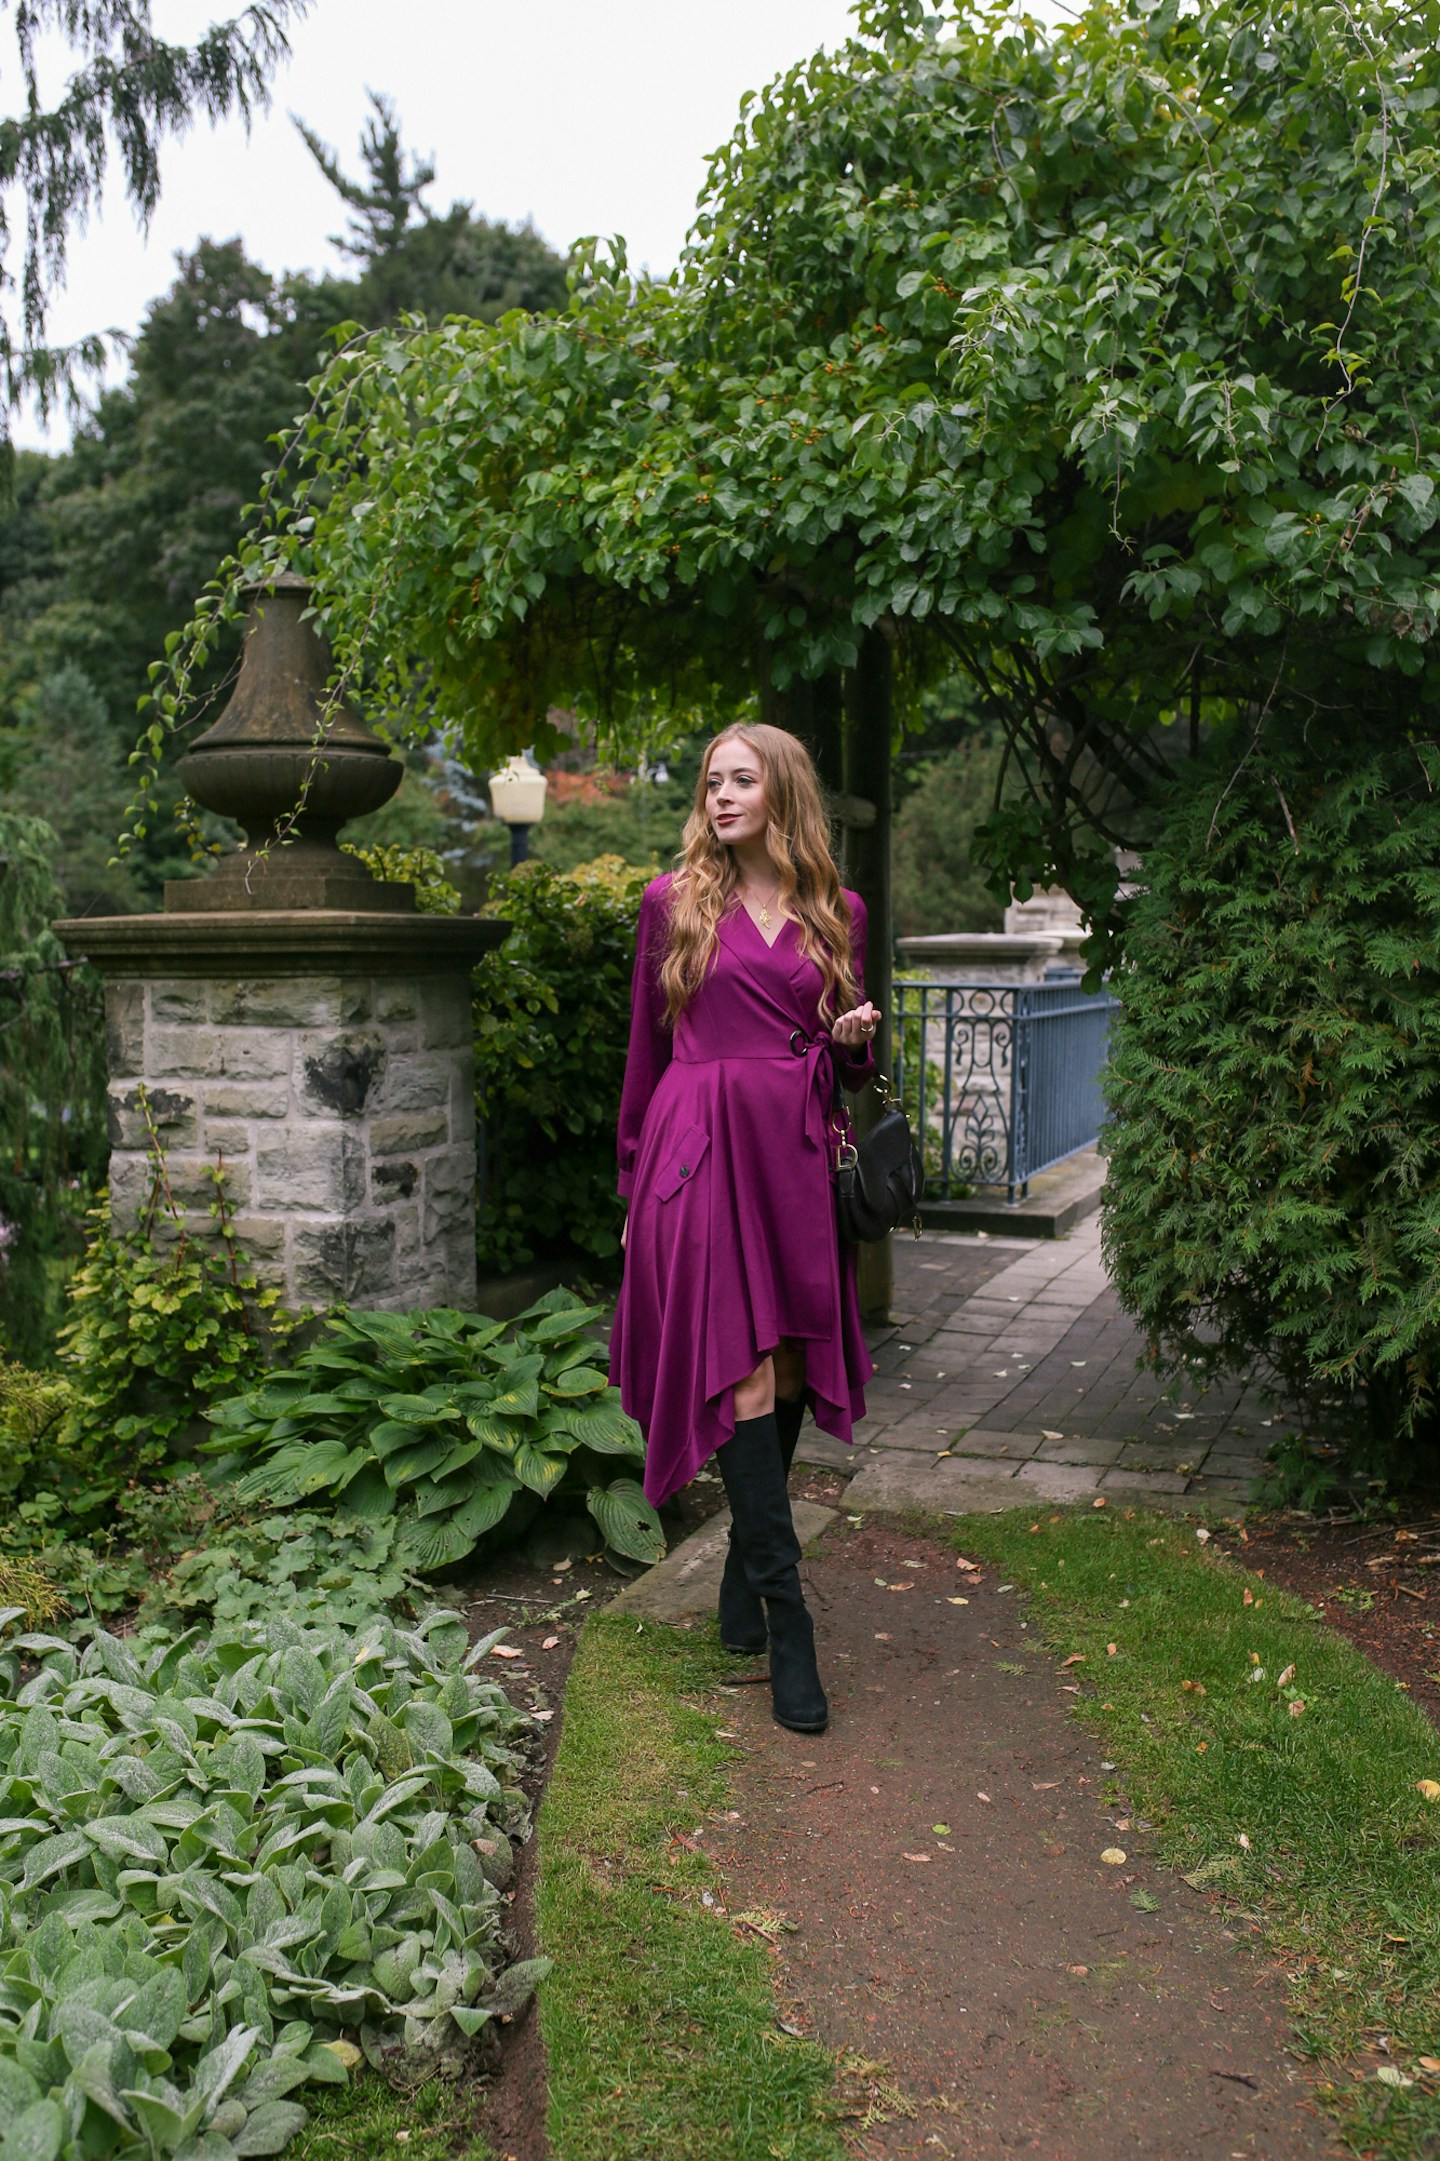 How to wear tall black boots with a dress: styled a pair of Unisa Indyia over the knee boots with a Chriselle Lim Wren Trench dress for a chic fall look perfect for a concert or date night.